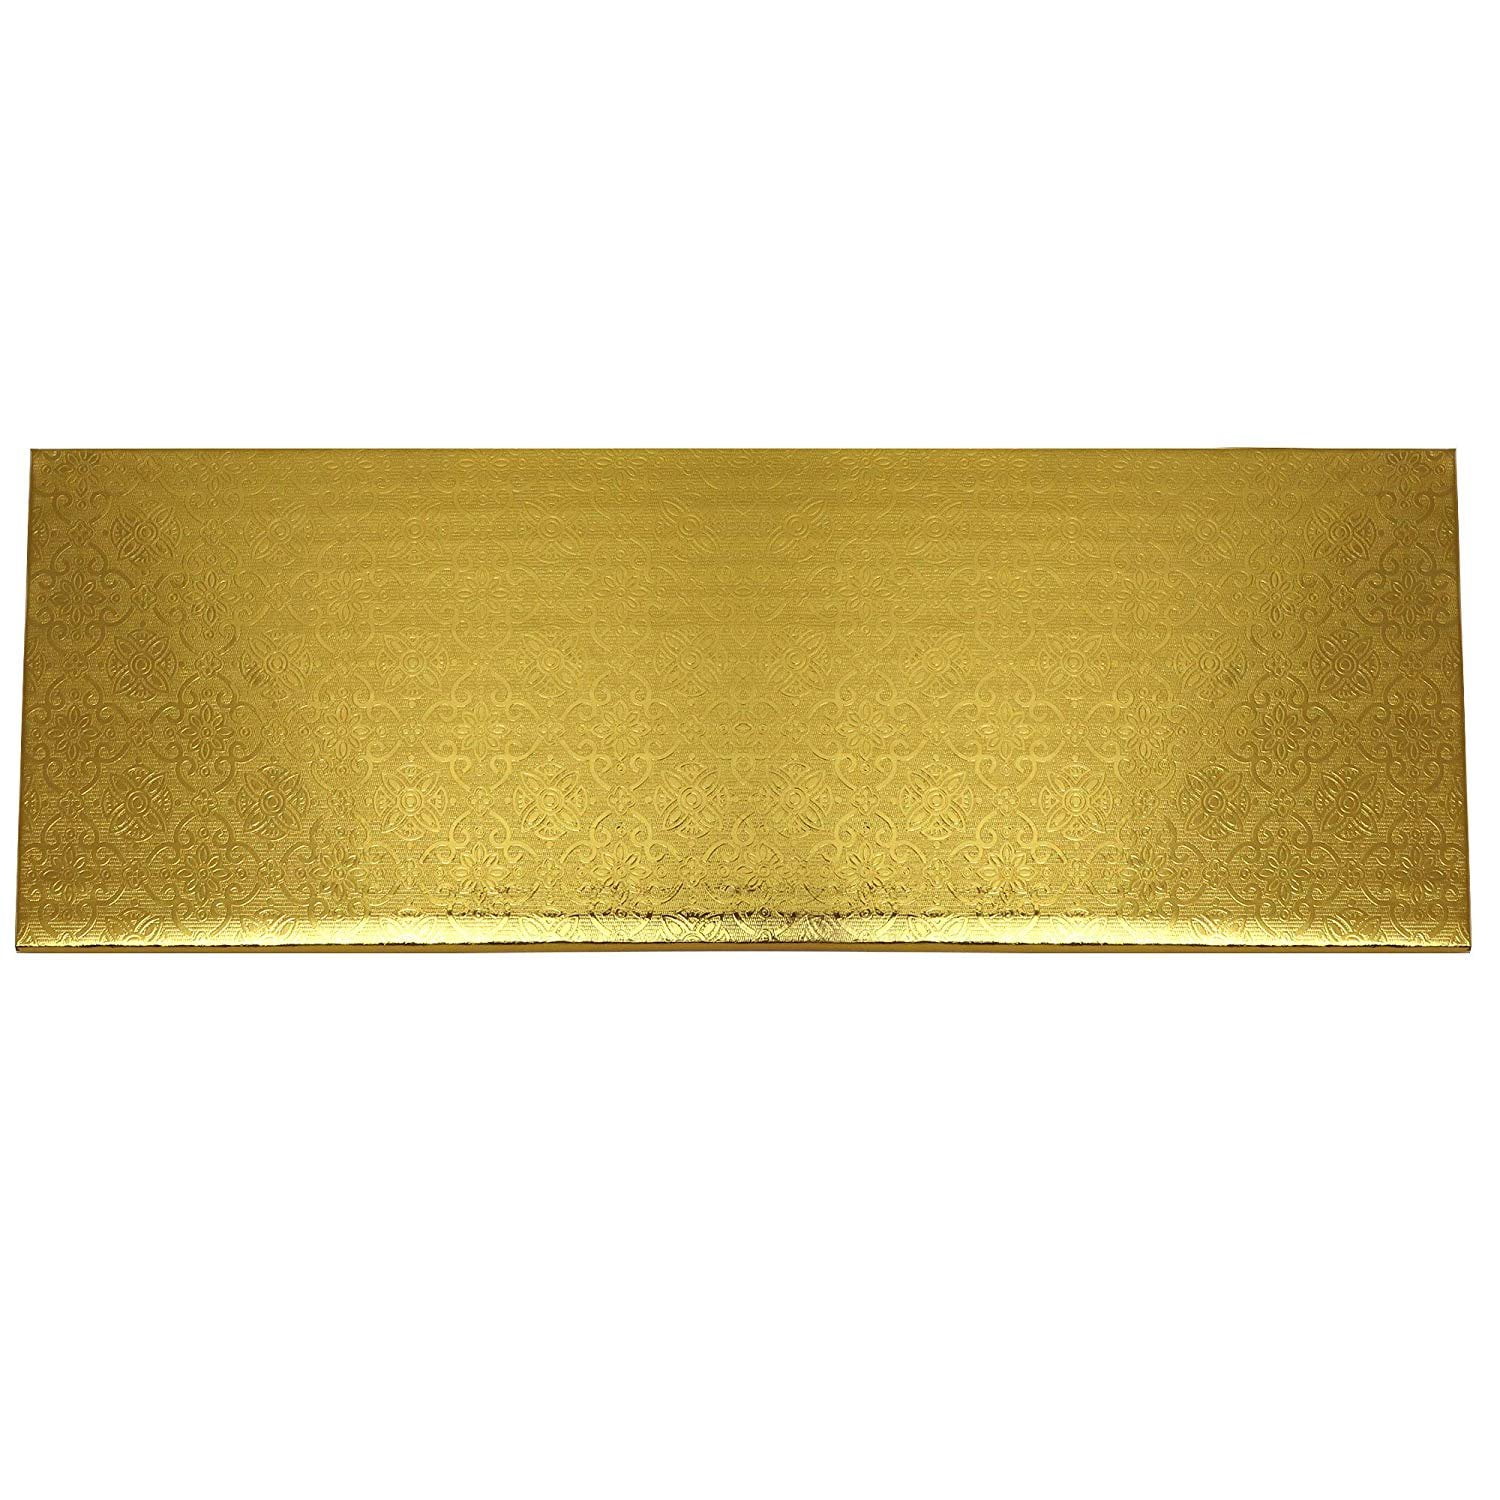 Full-Sheet Size - Pack of 10 17 Inch x 25 Inch OCreme Gold-Top Scalloped Rectangular Cake and Pastry Board 3//32 Inch Thick